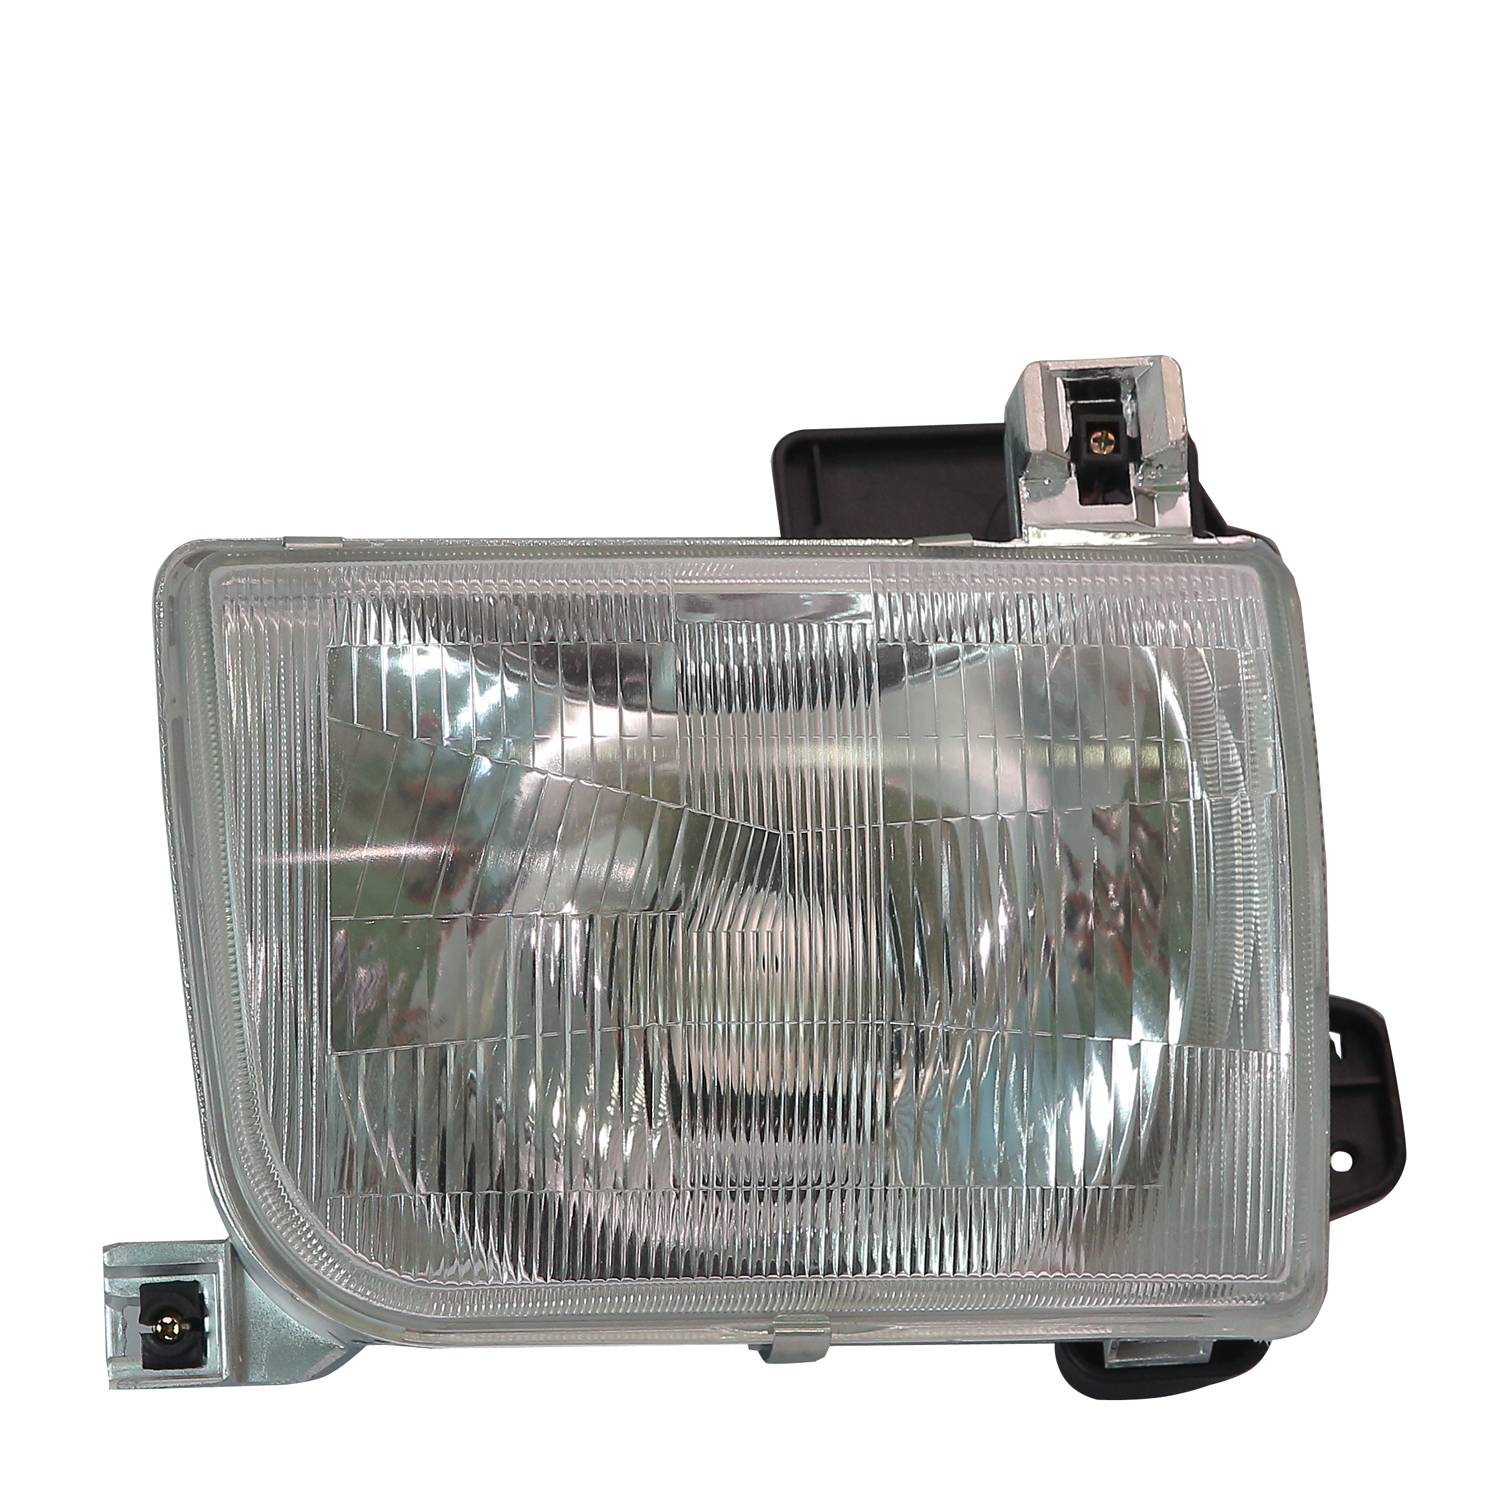 Aftermark Headlight Head Lamp with OE 260103s325 260103s225 260603s325 260603s225 For Nissan D22 1997 1998 1999 2000